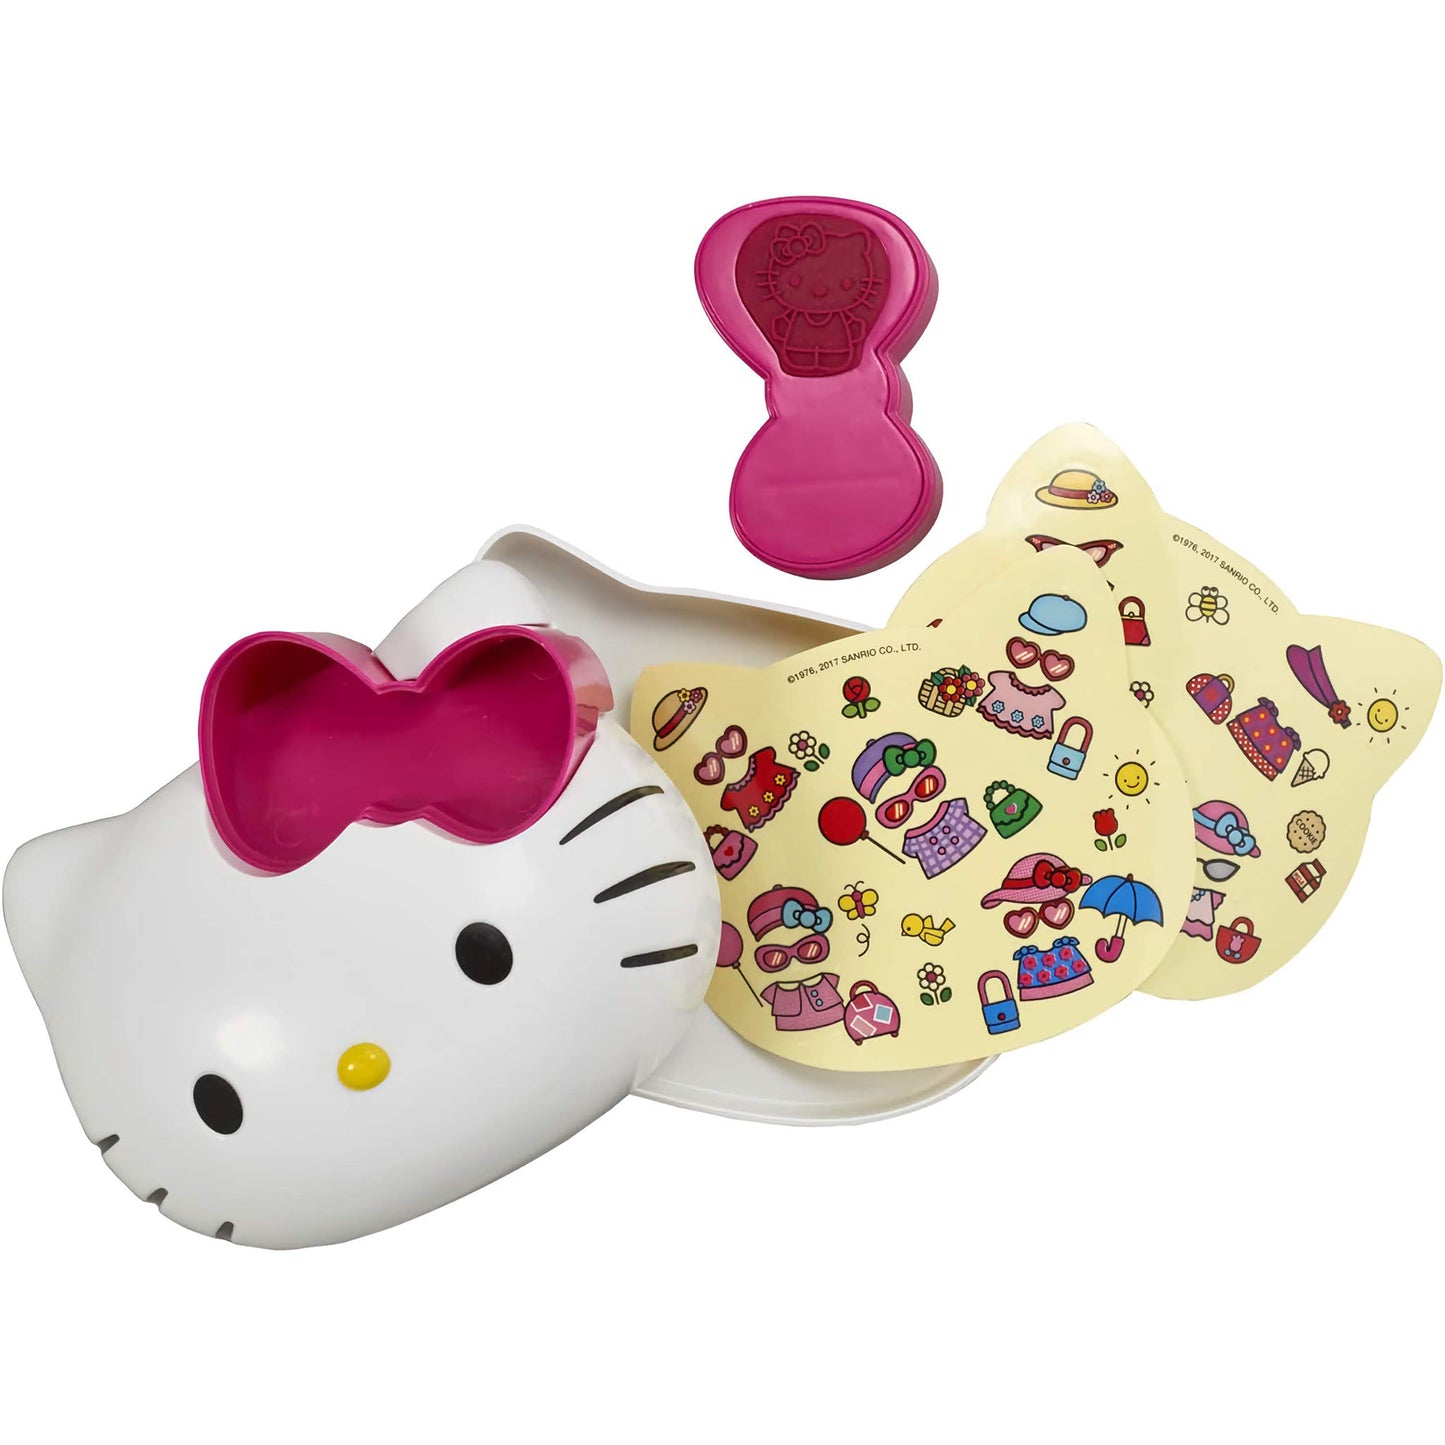 Hello Kitty Cake Topper with Surprise Toy Set Decopac